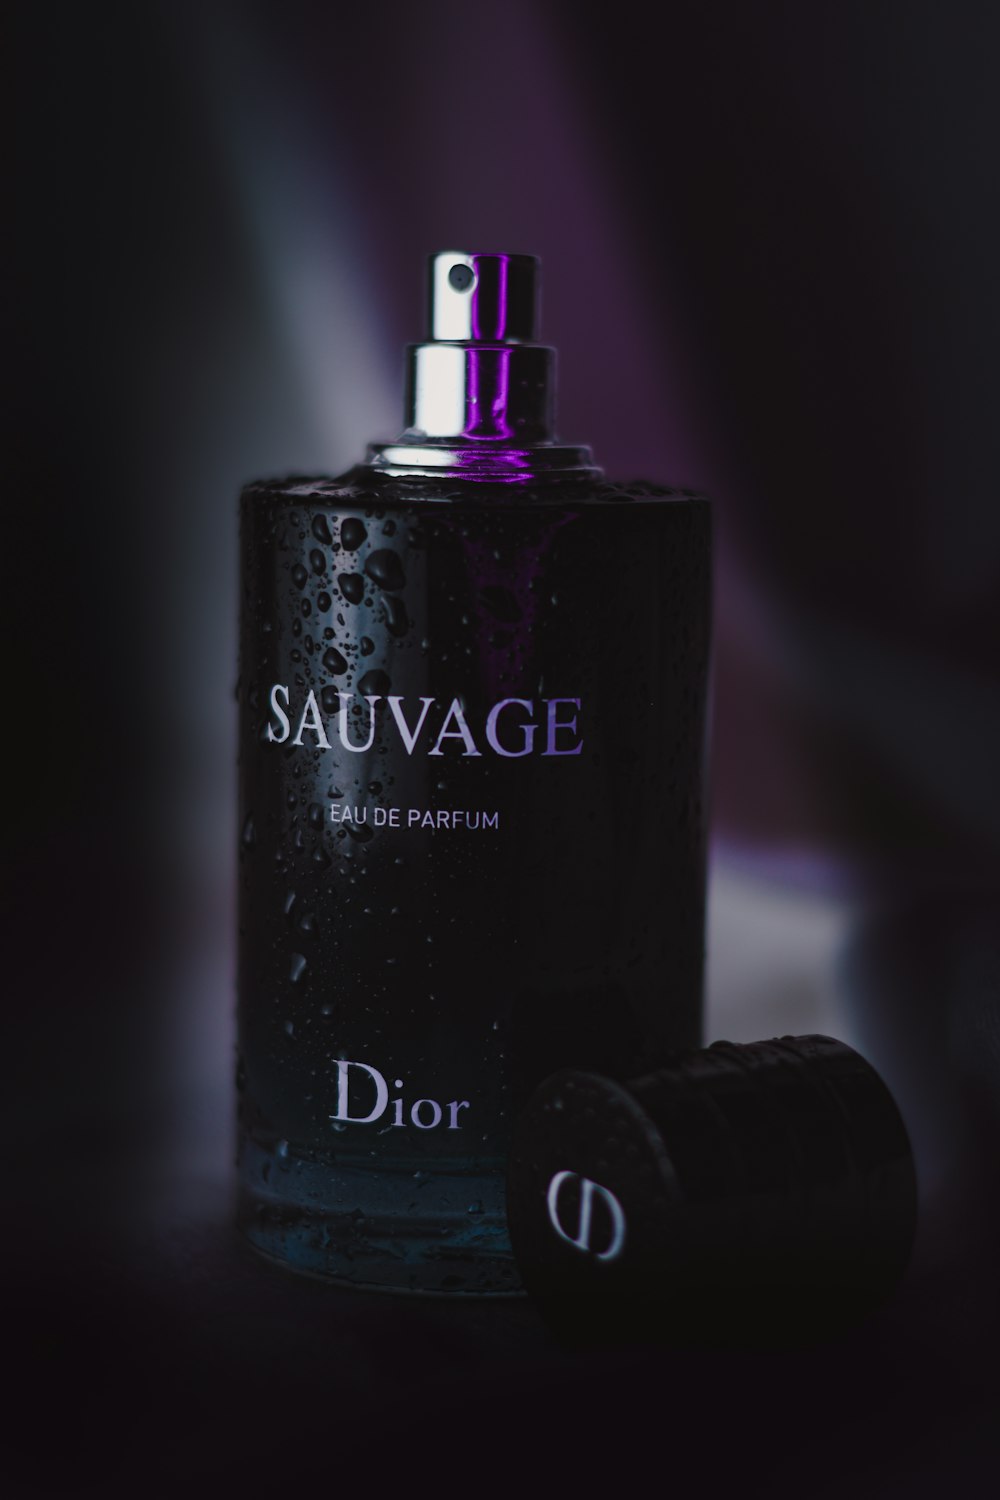 a bottle of dior sauvage on a table